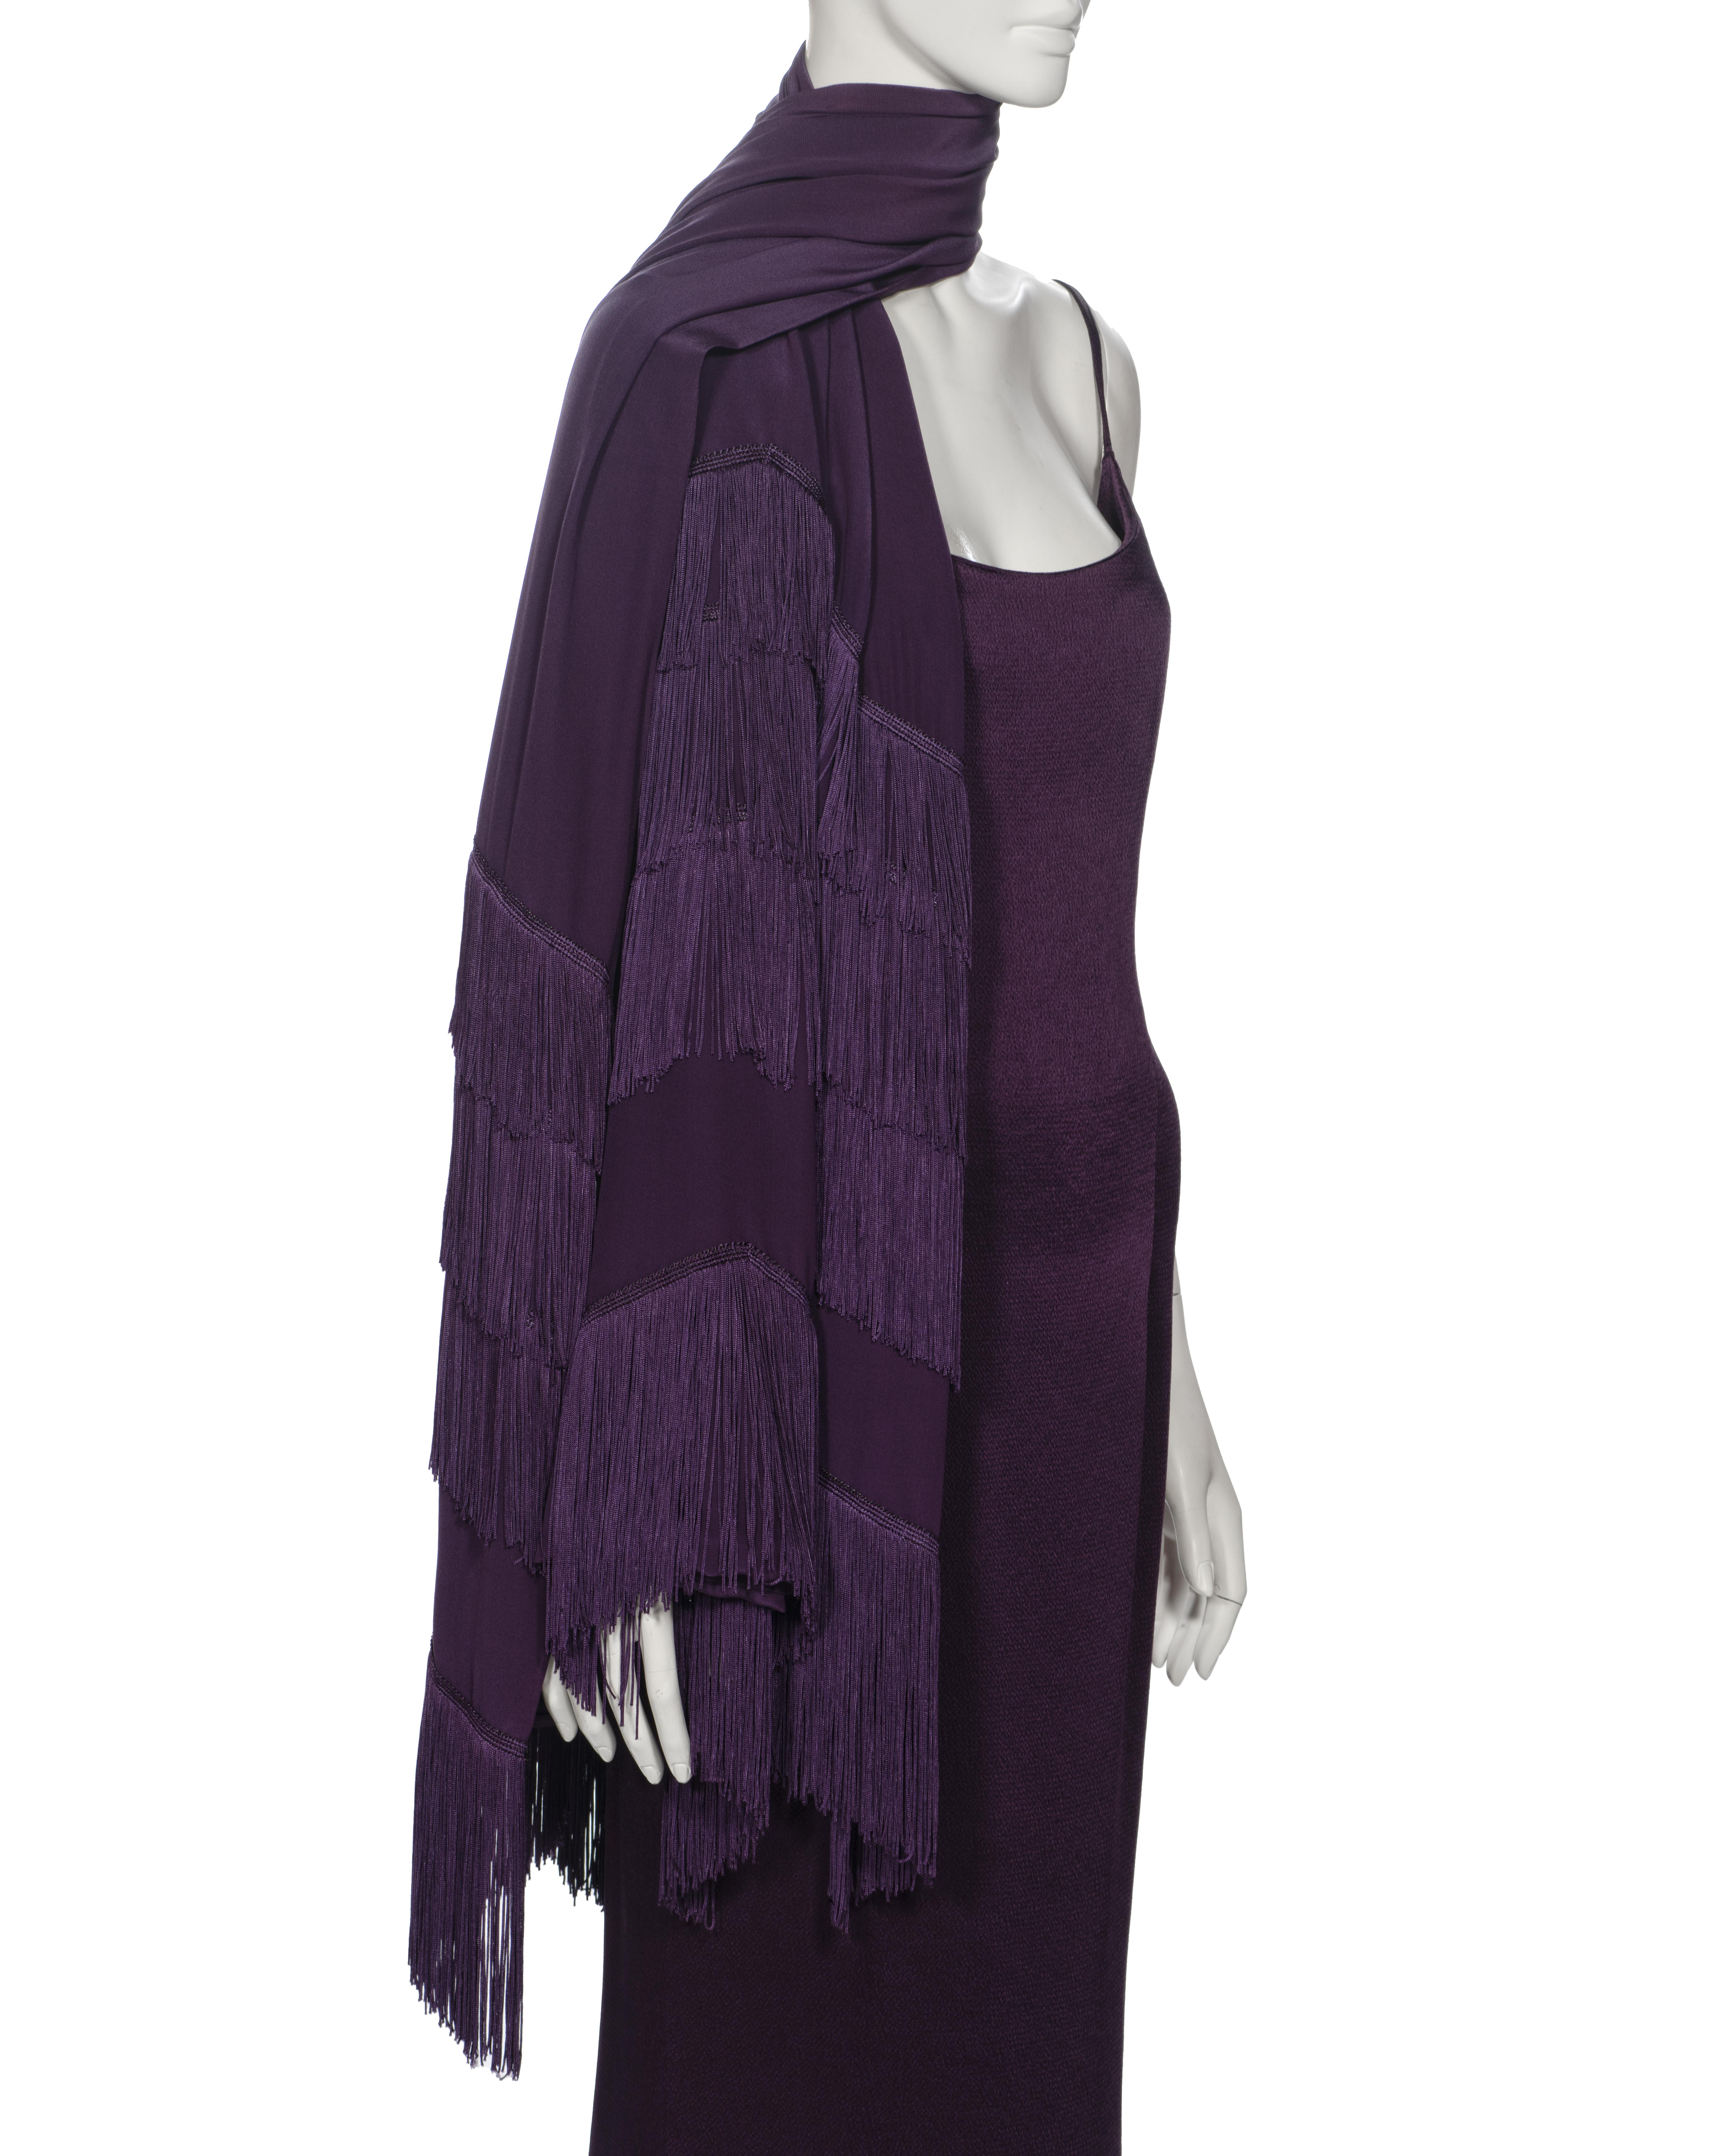 Christian Dior by John Galliano Purple Satin Evening Dress and Shawl, ss 1998 For Sale 2